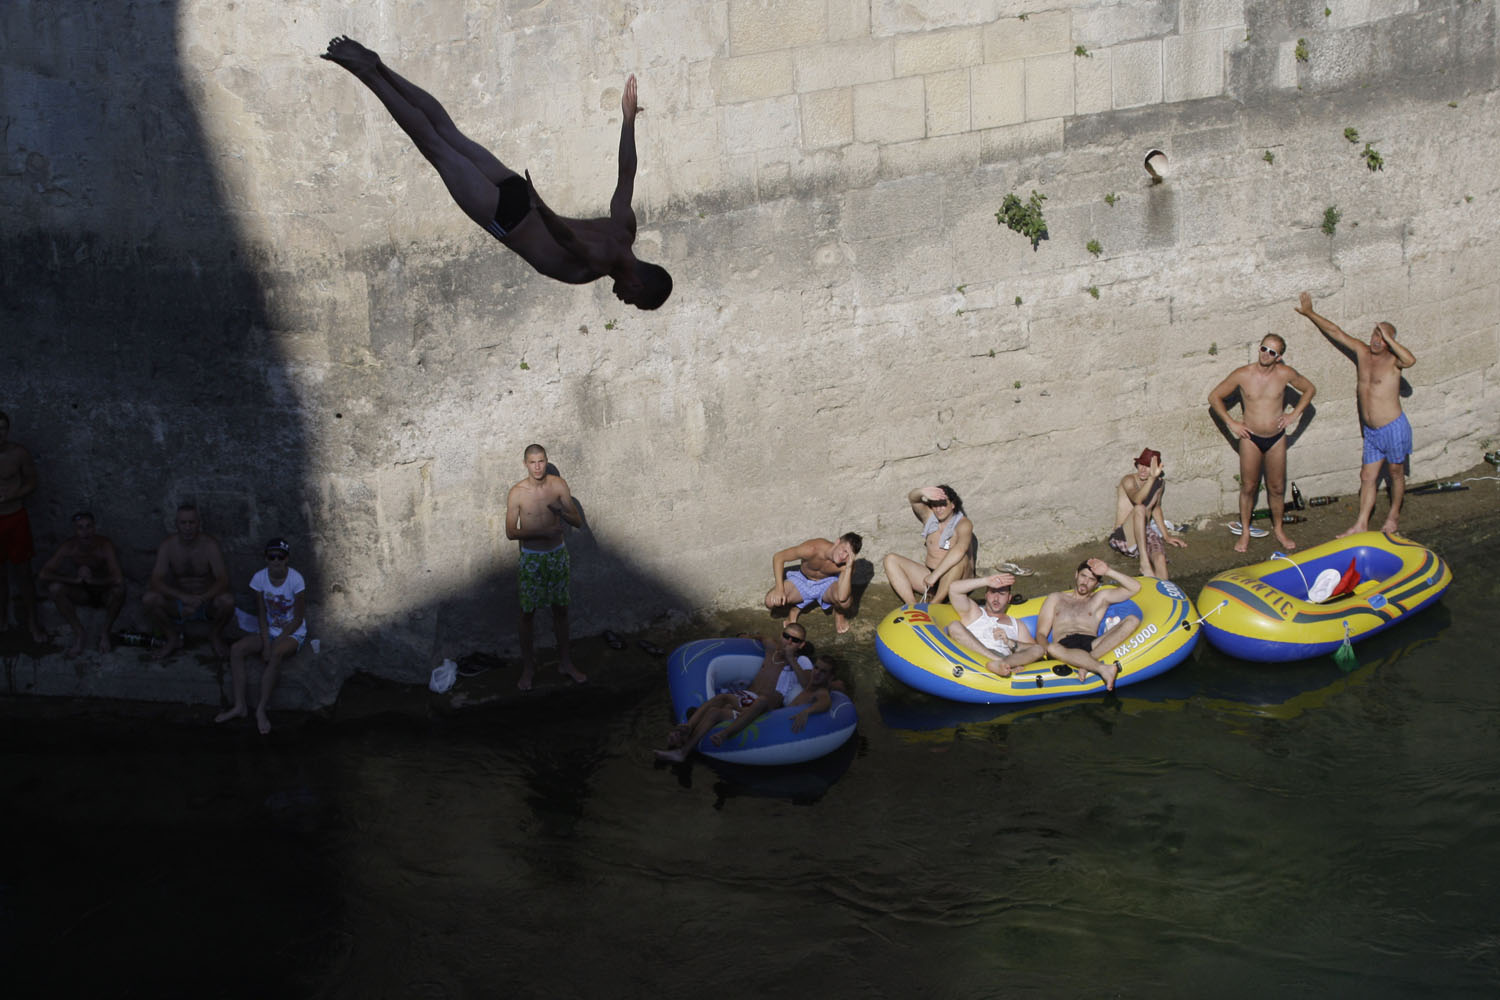 July 28, 2013. Spectators watch as a diver jumps from the Old Mostar Bridge during 447th traditional annual high diving competition, in Mostar, 140 kms south of the Bosnian capital of Sarajevo.